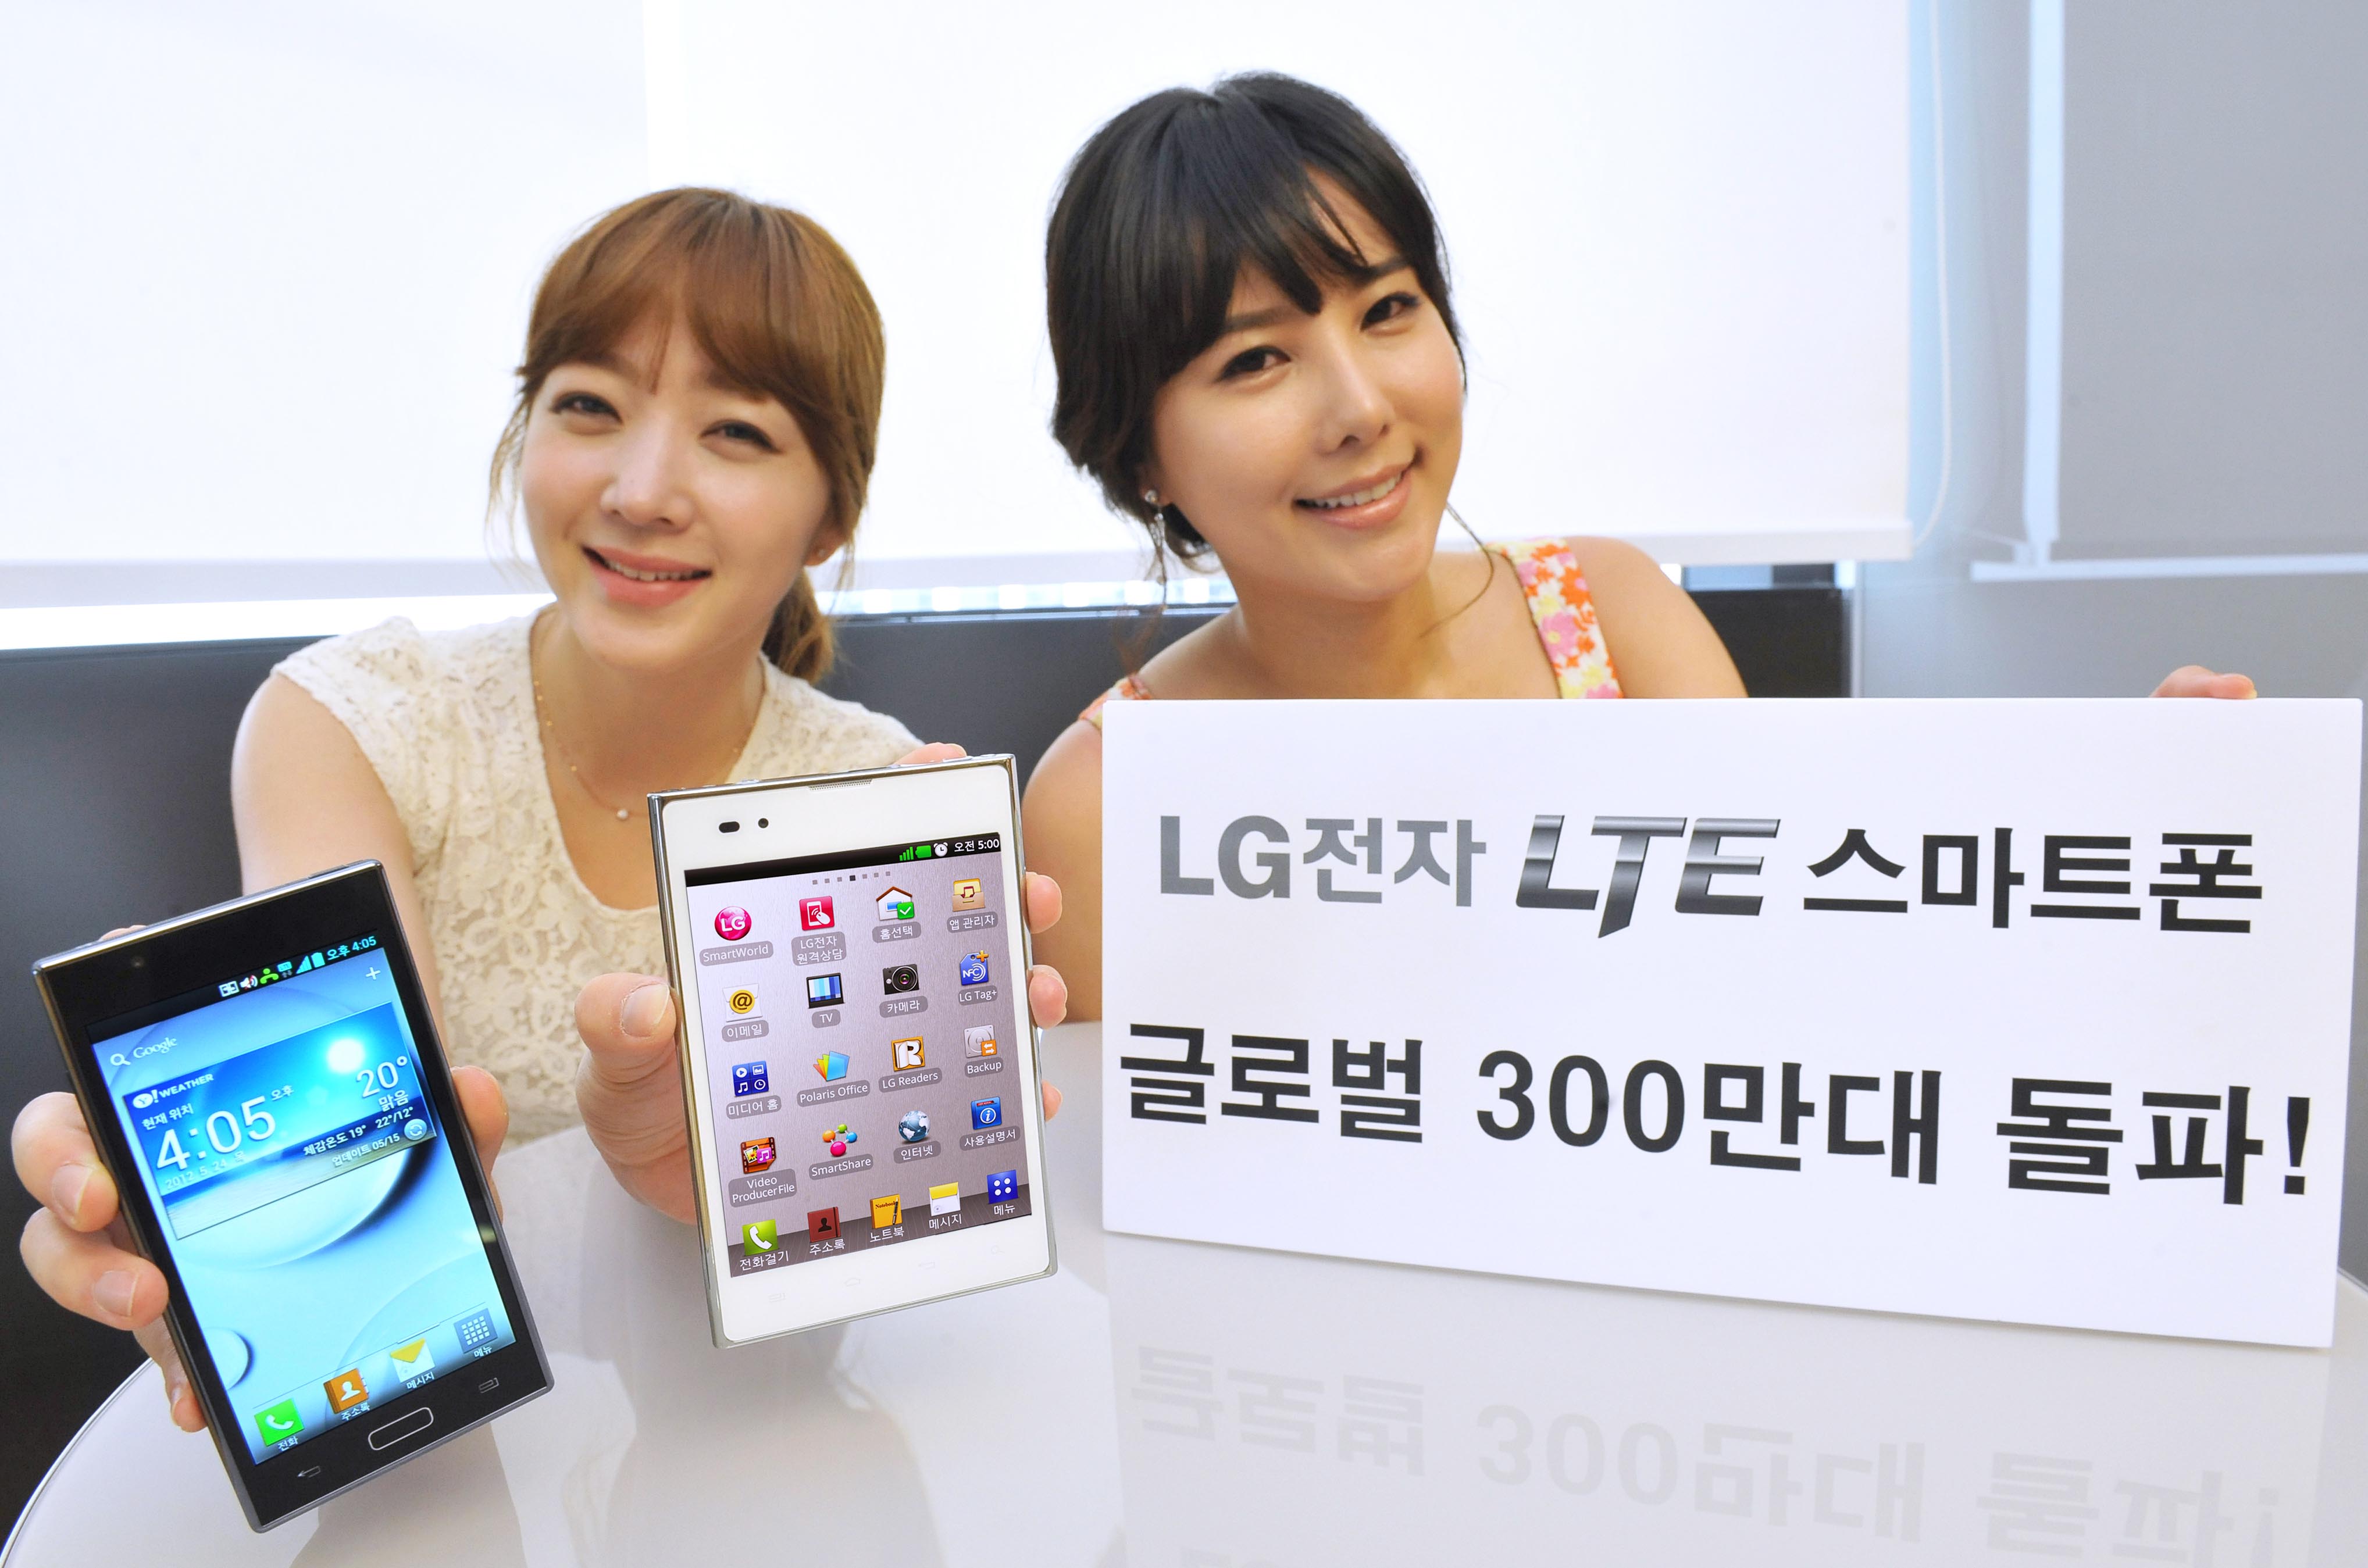 A model holds the black LG Optimus LTE in one hand and the white version in the other, while another model holds a paper panel celebrating three million sales